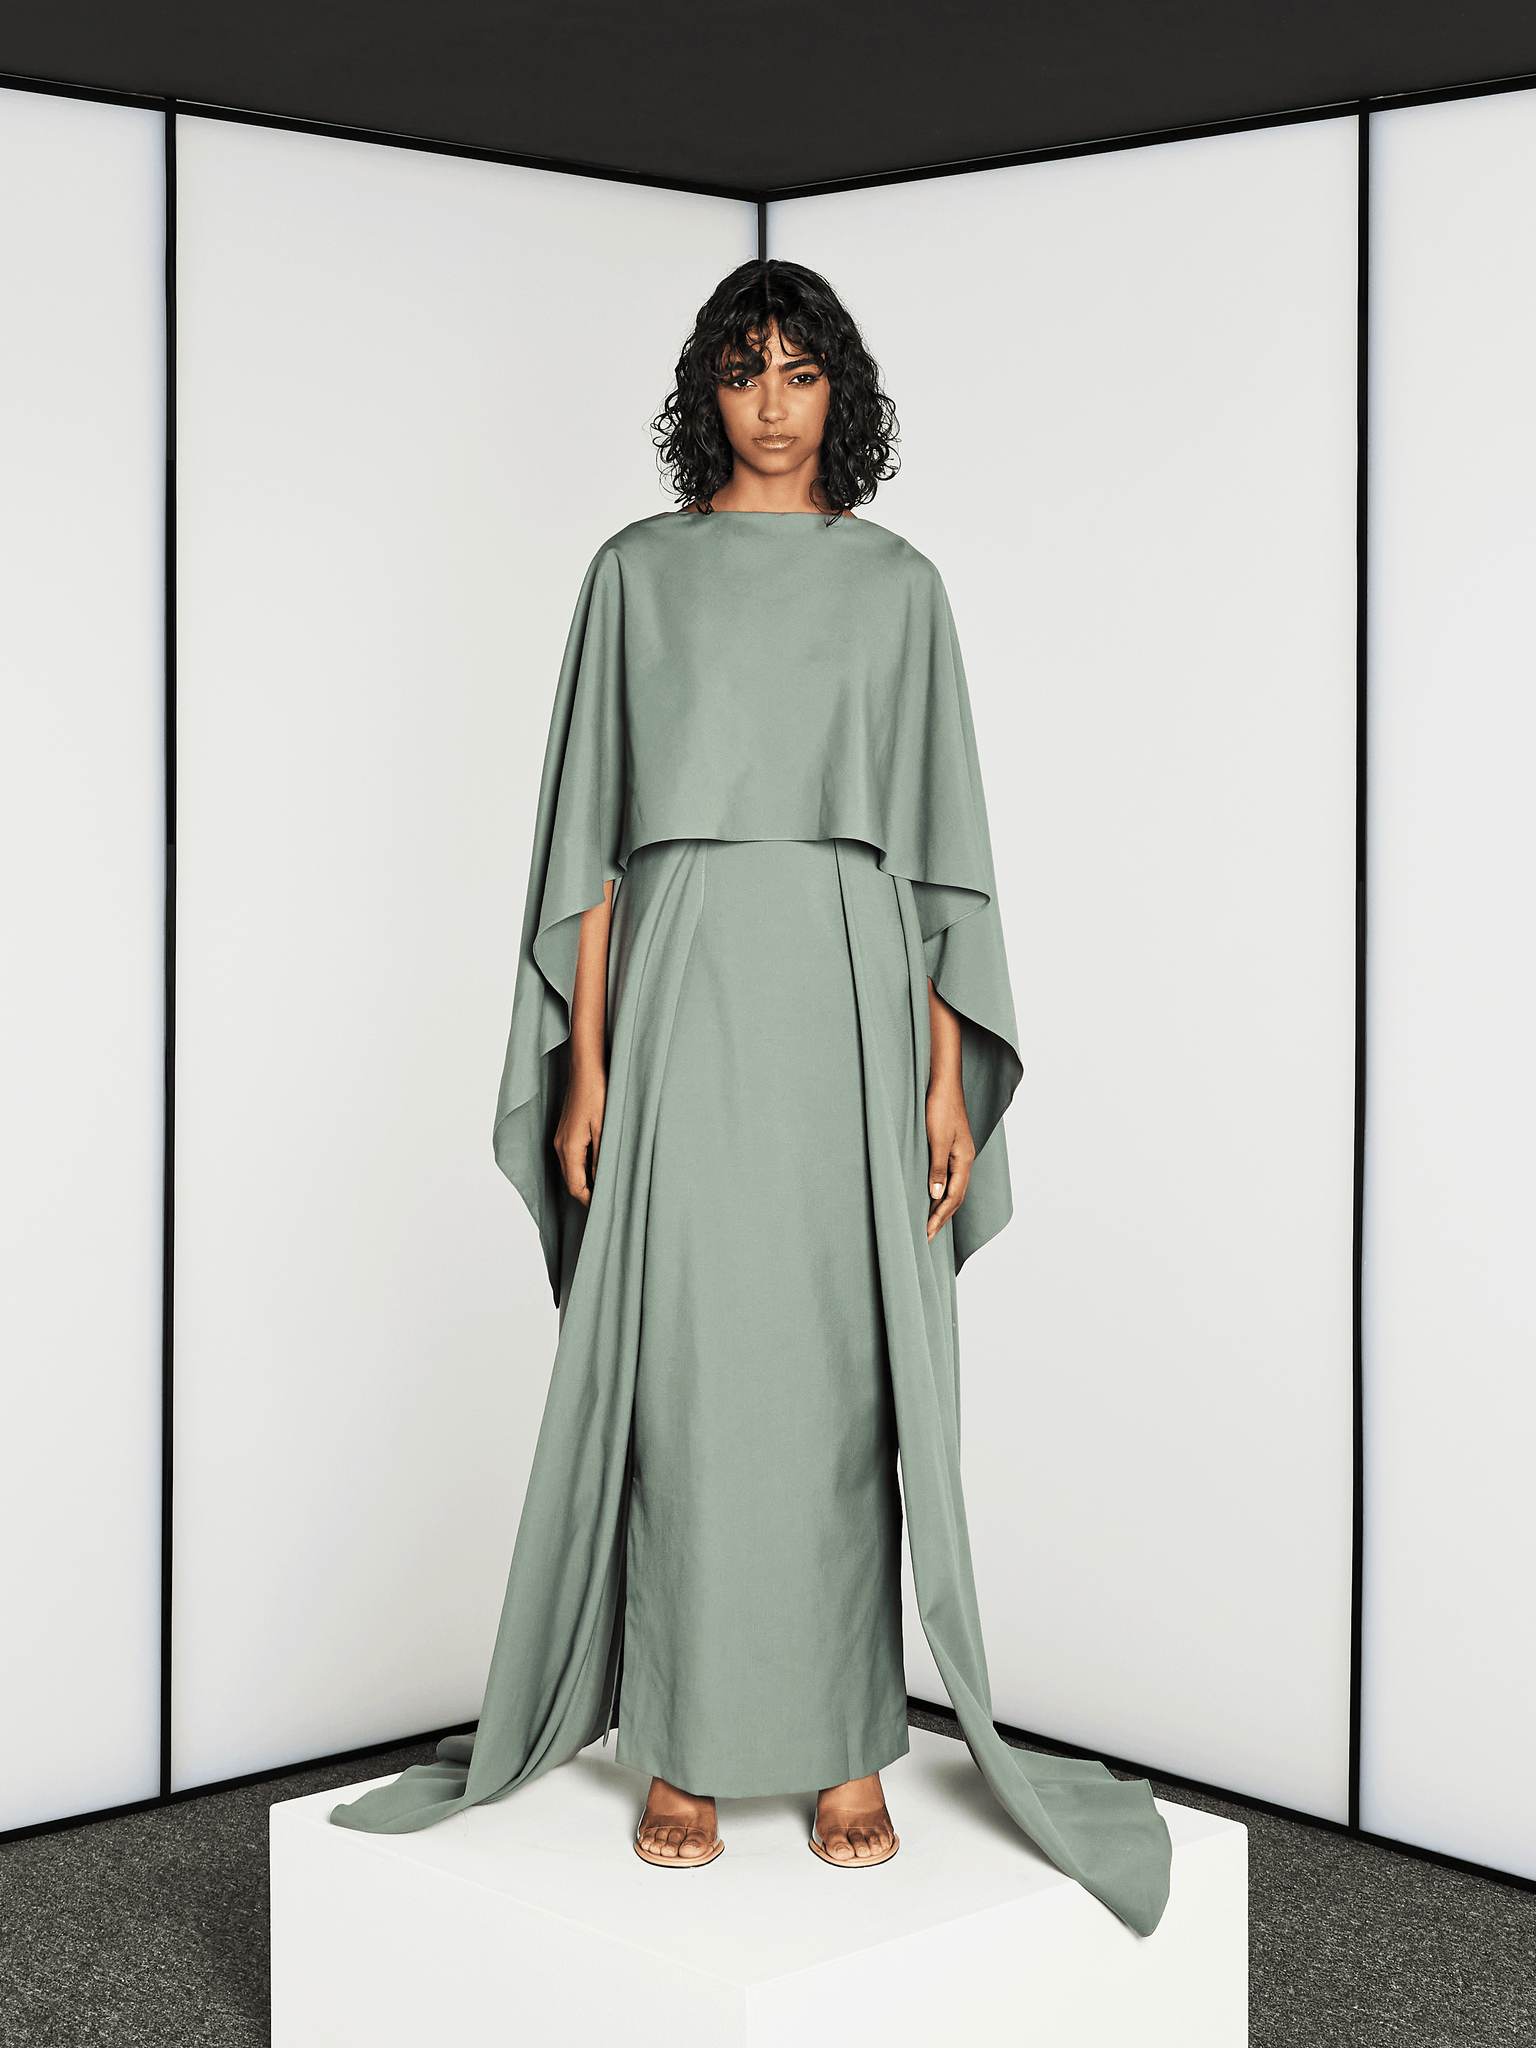 CREPE PANELED DRESS WITH TRAIL AND OVERLAY